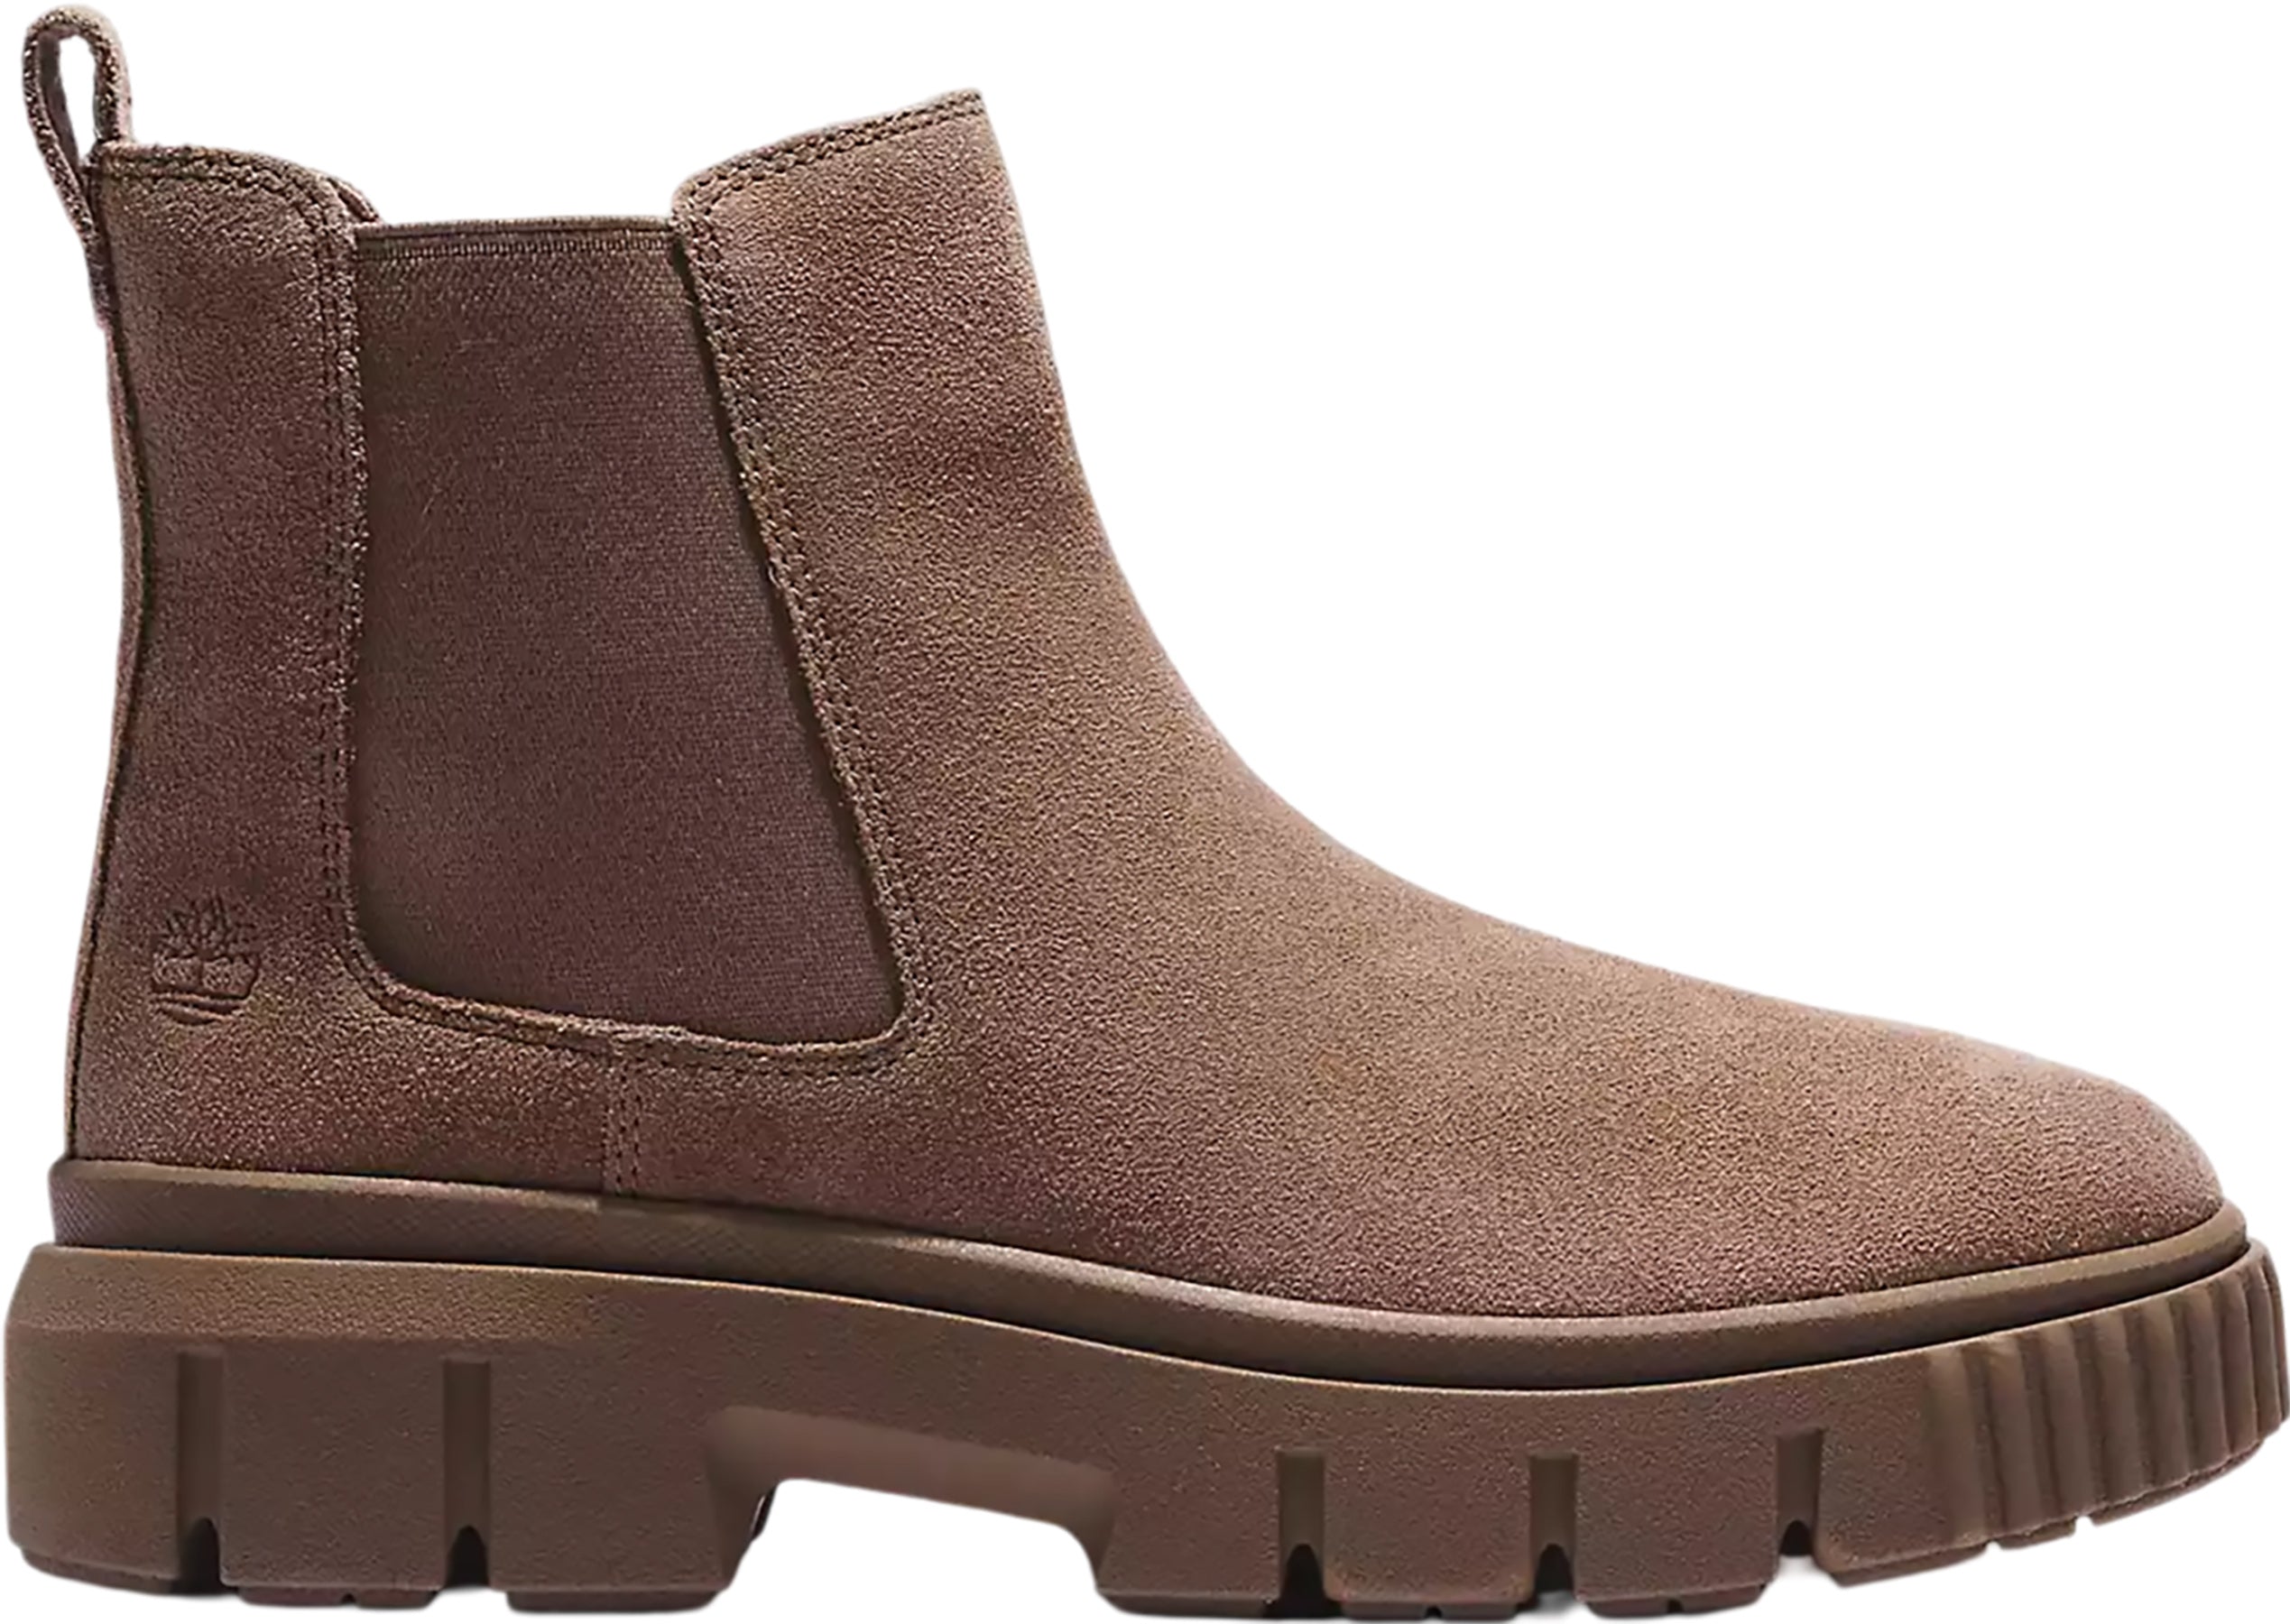 Timberland Greyfield Chelsea Boots - Women's